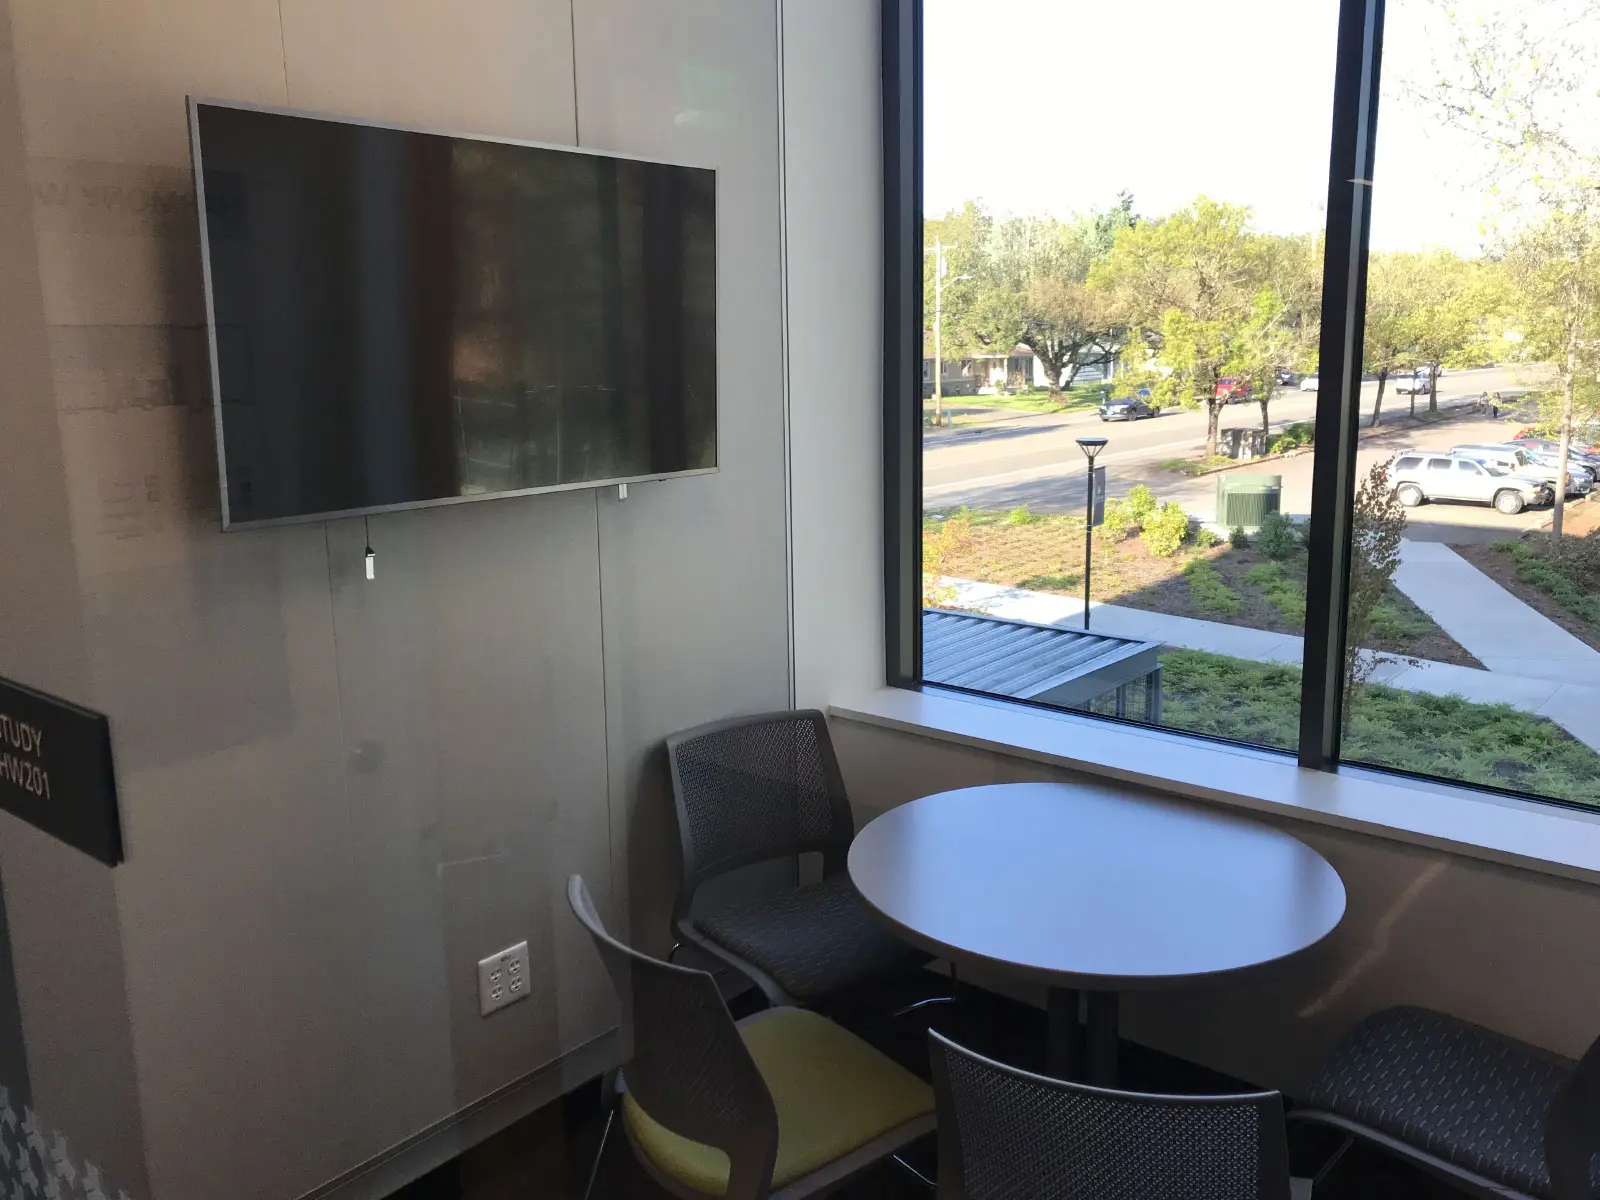 A TV screen in front of a window and small table with chairs in the Harmony campus conference room